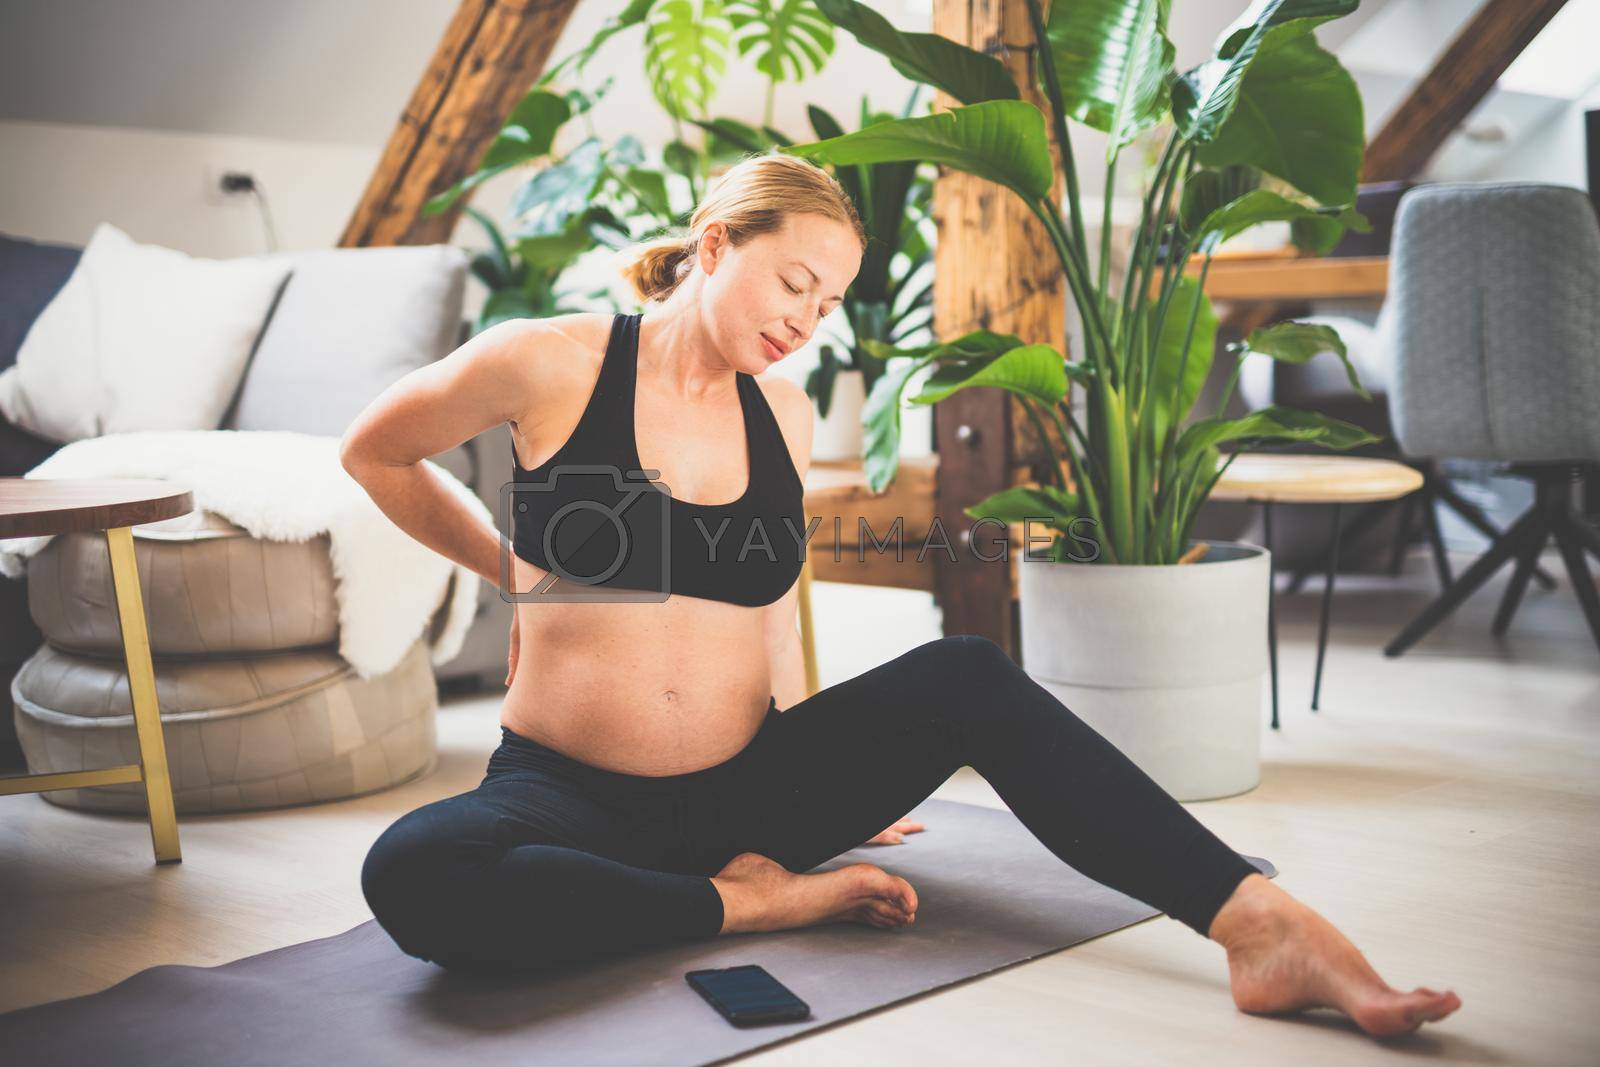 Young beautiful pregnant woman training yoga and stretching, feeling backpain at home in her living room. Motherhood, pregnancy, healthy lifestyle and yoga concept